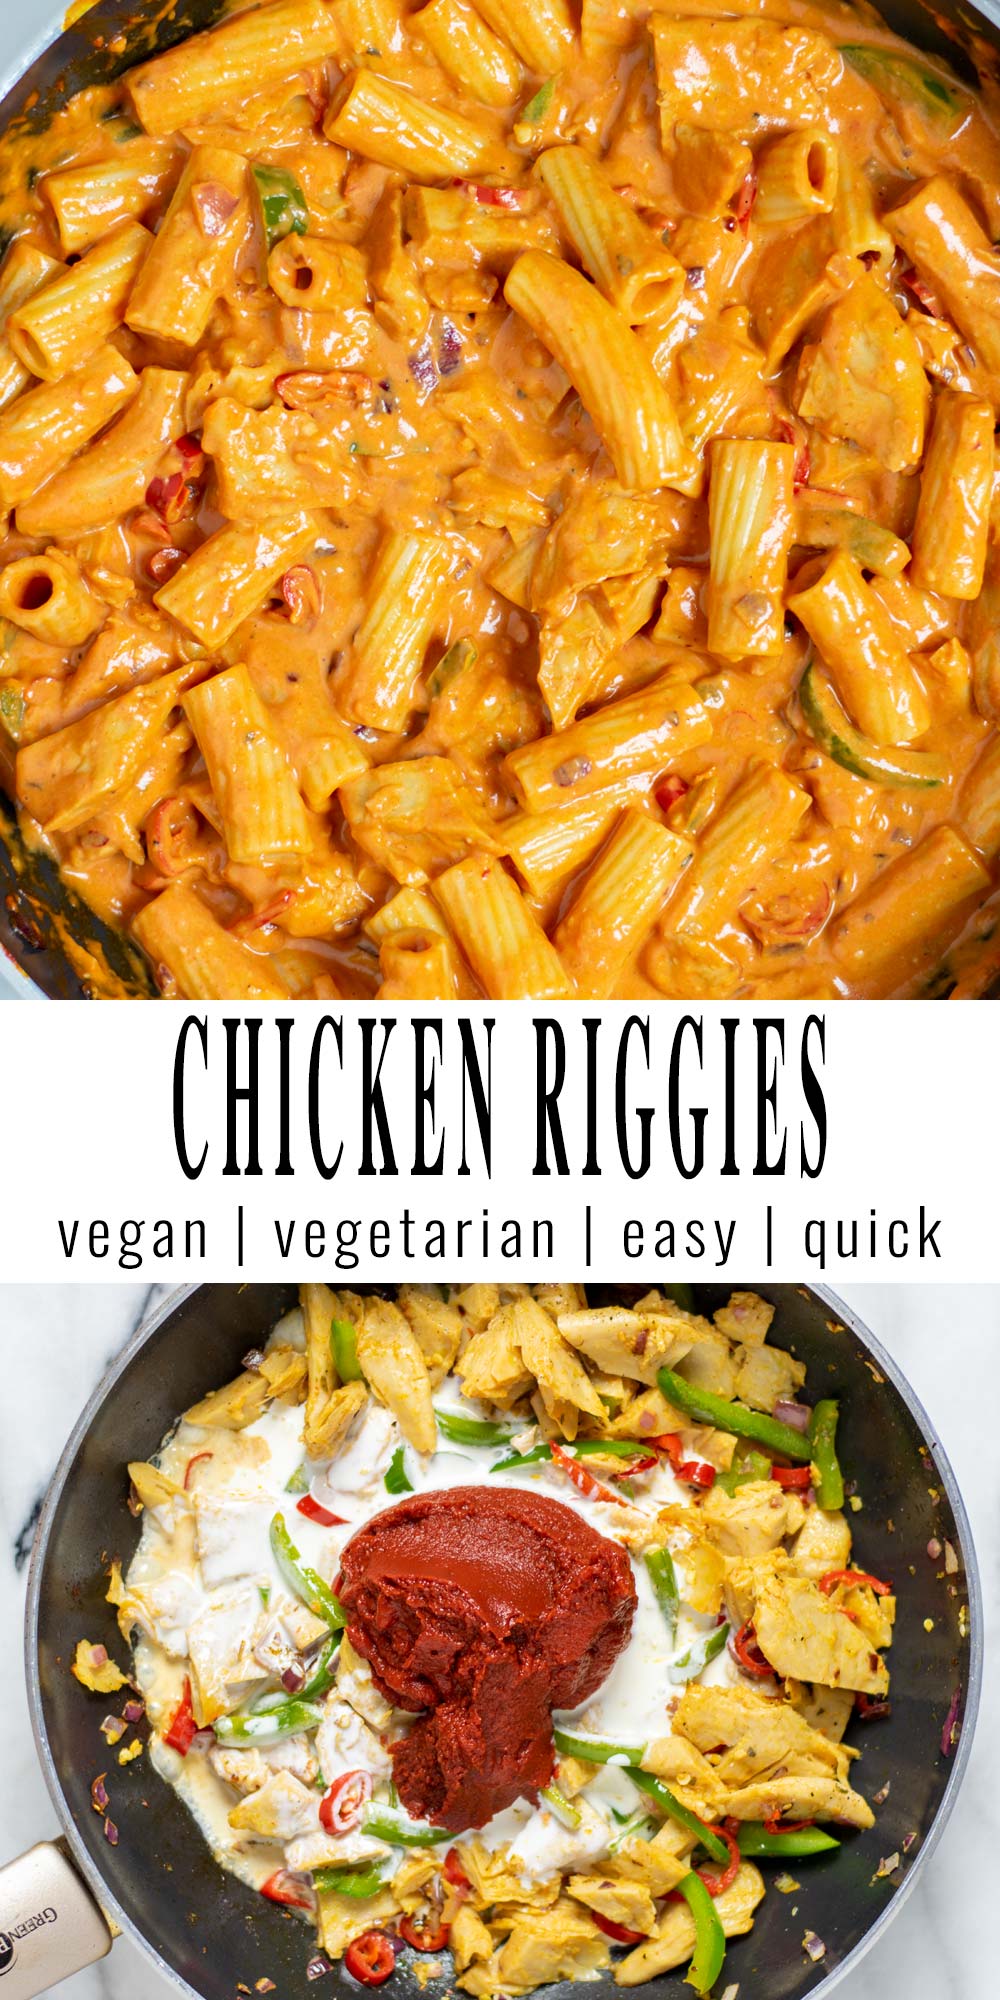 Collage of two pictures of the Chicken Riggies with recipe title text.